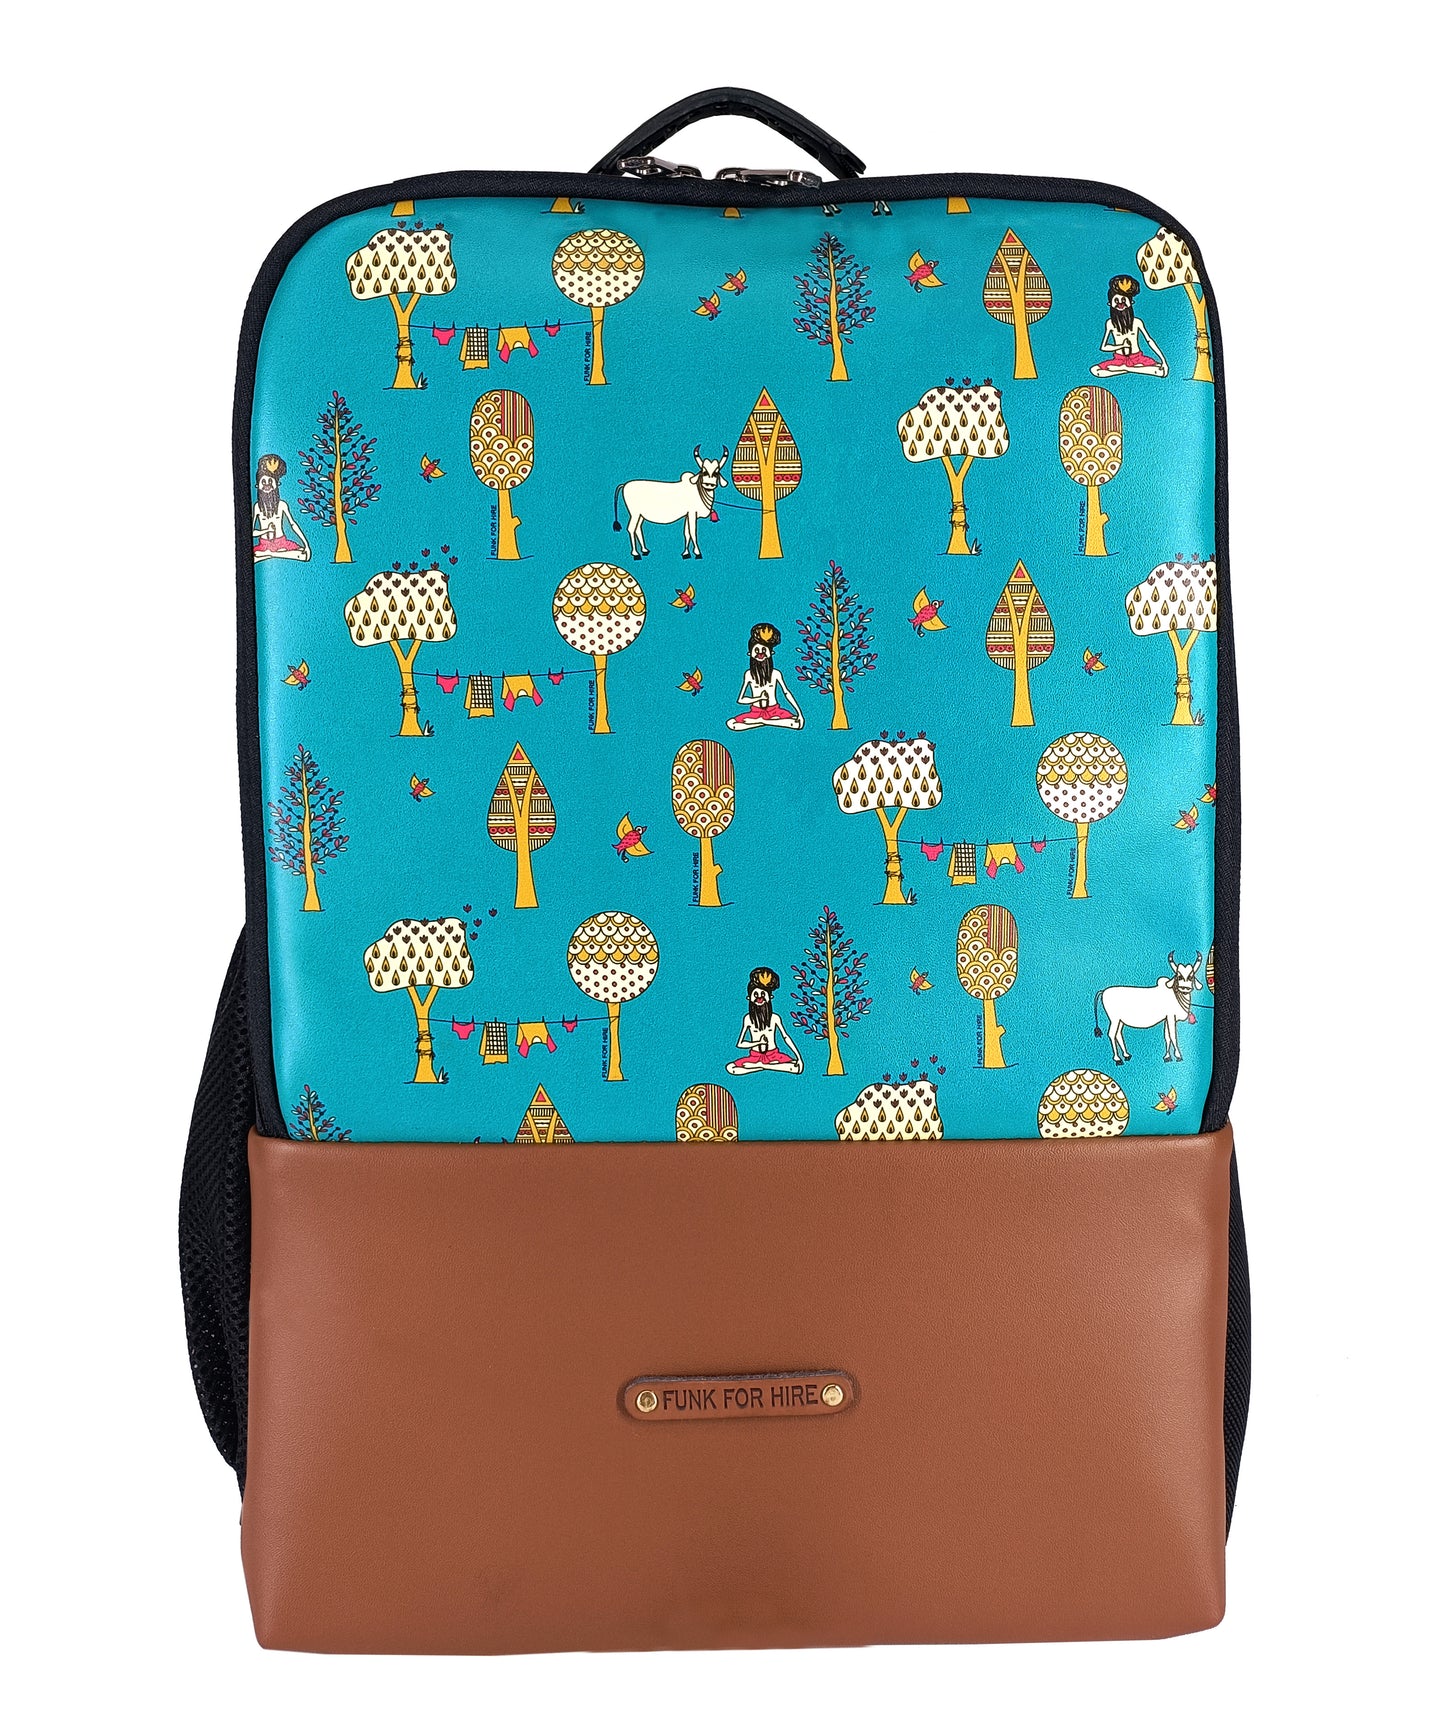 Backpack Tree Teal and Brown